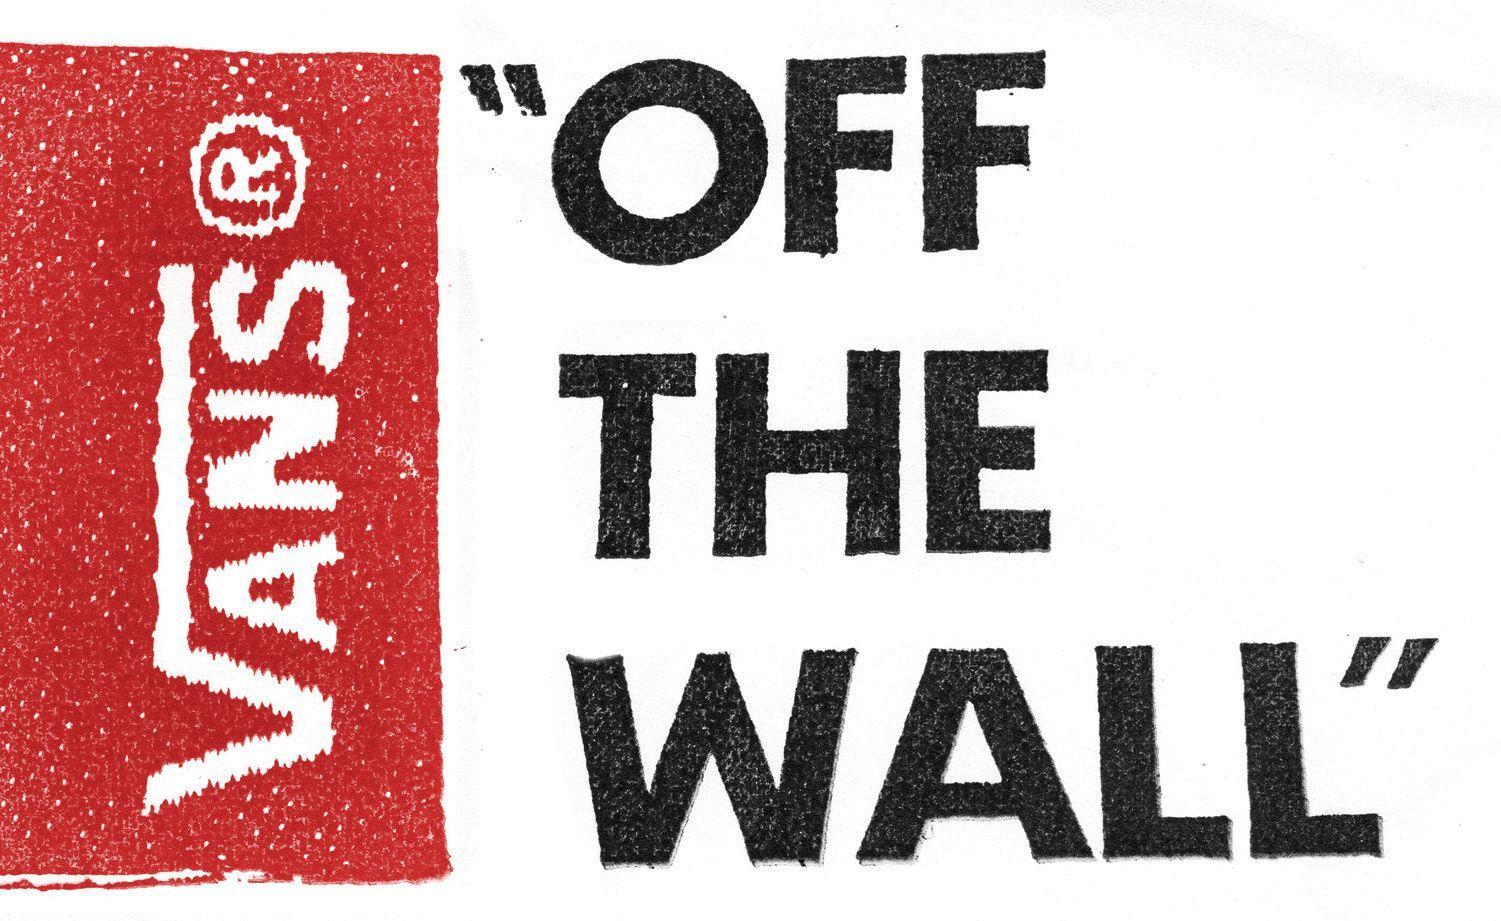 Off the Wall Logo - vans off the wall logo, cover photo. WISHLIST. Vans, Vans off